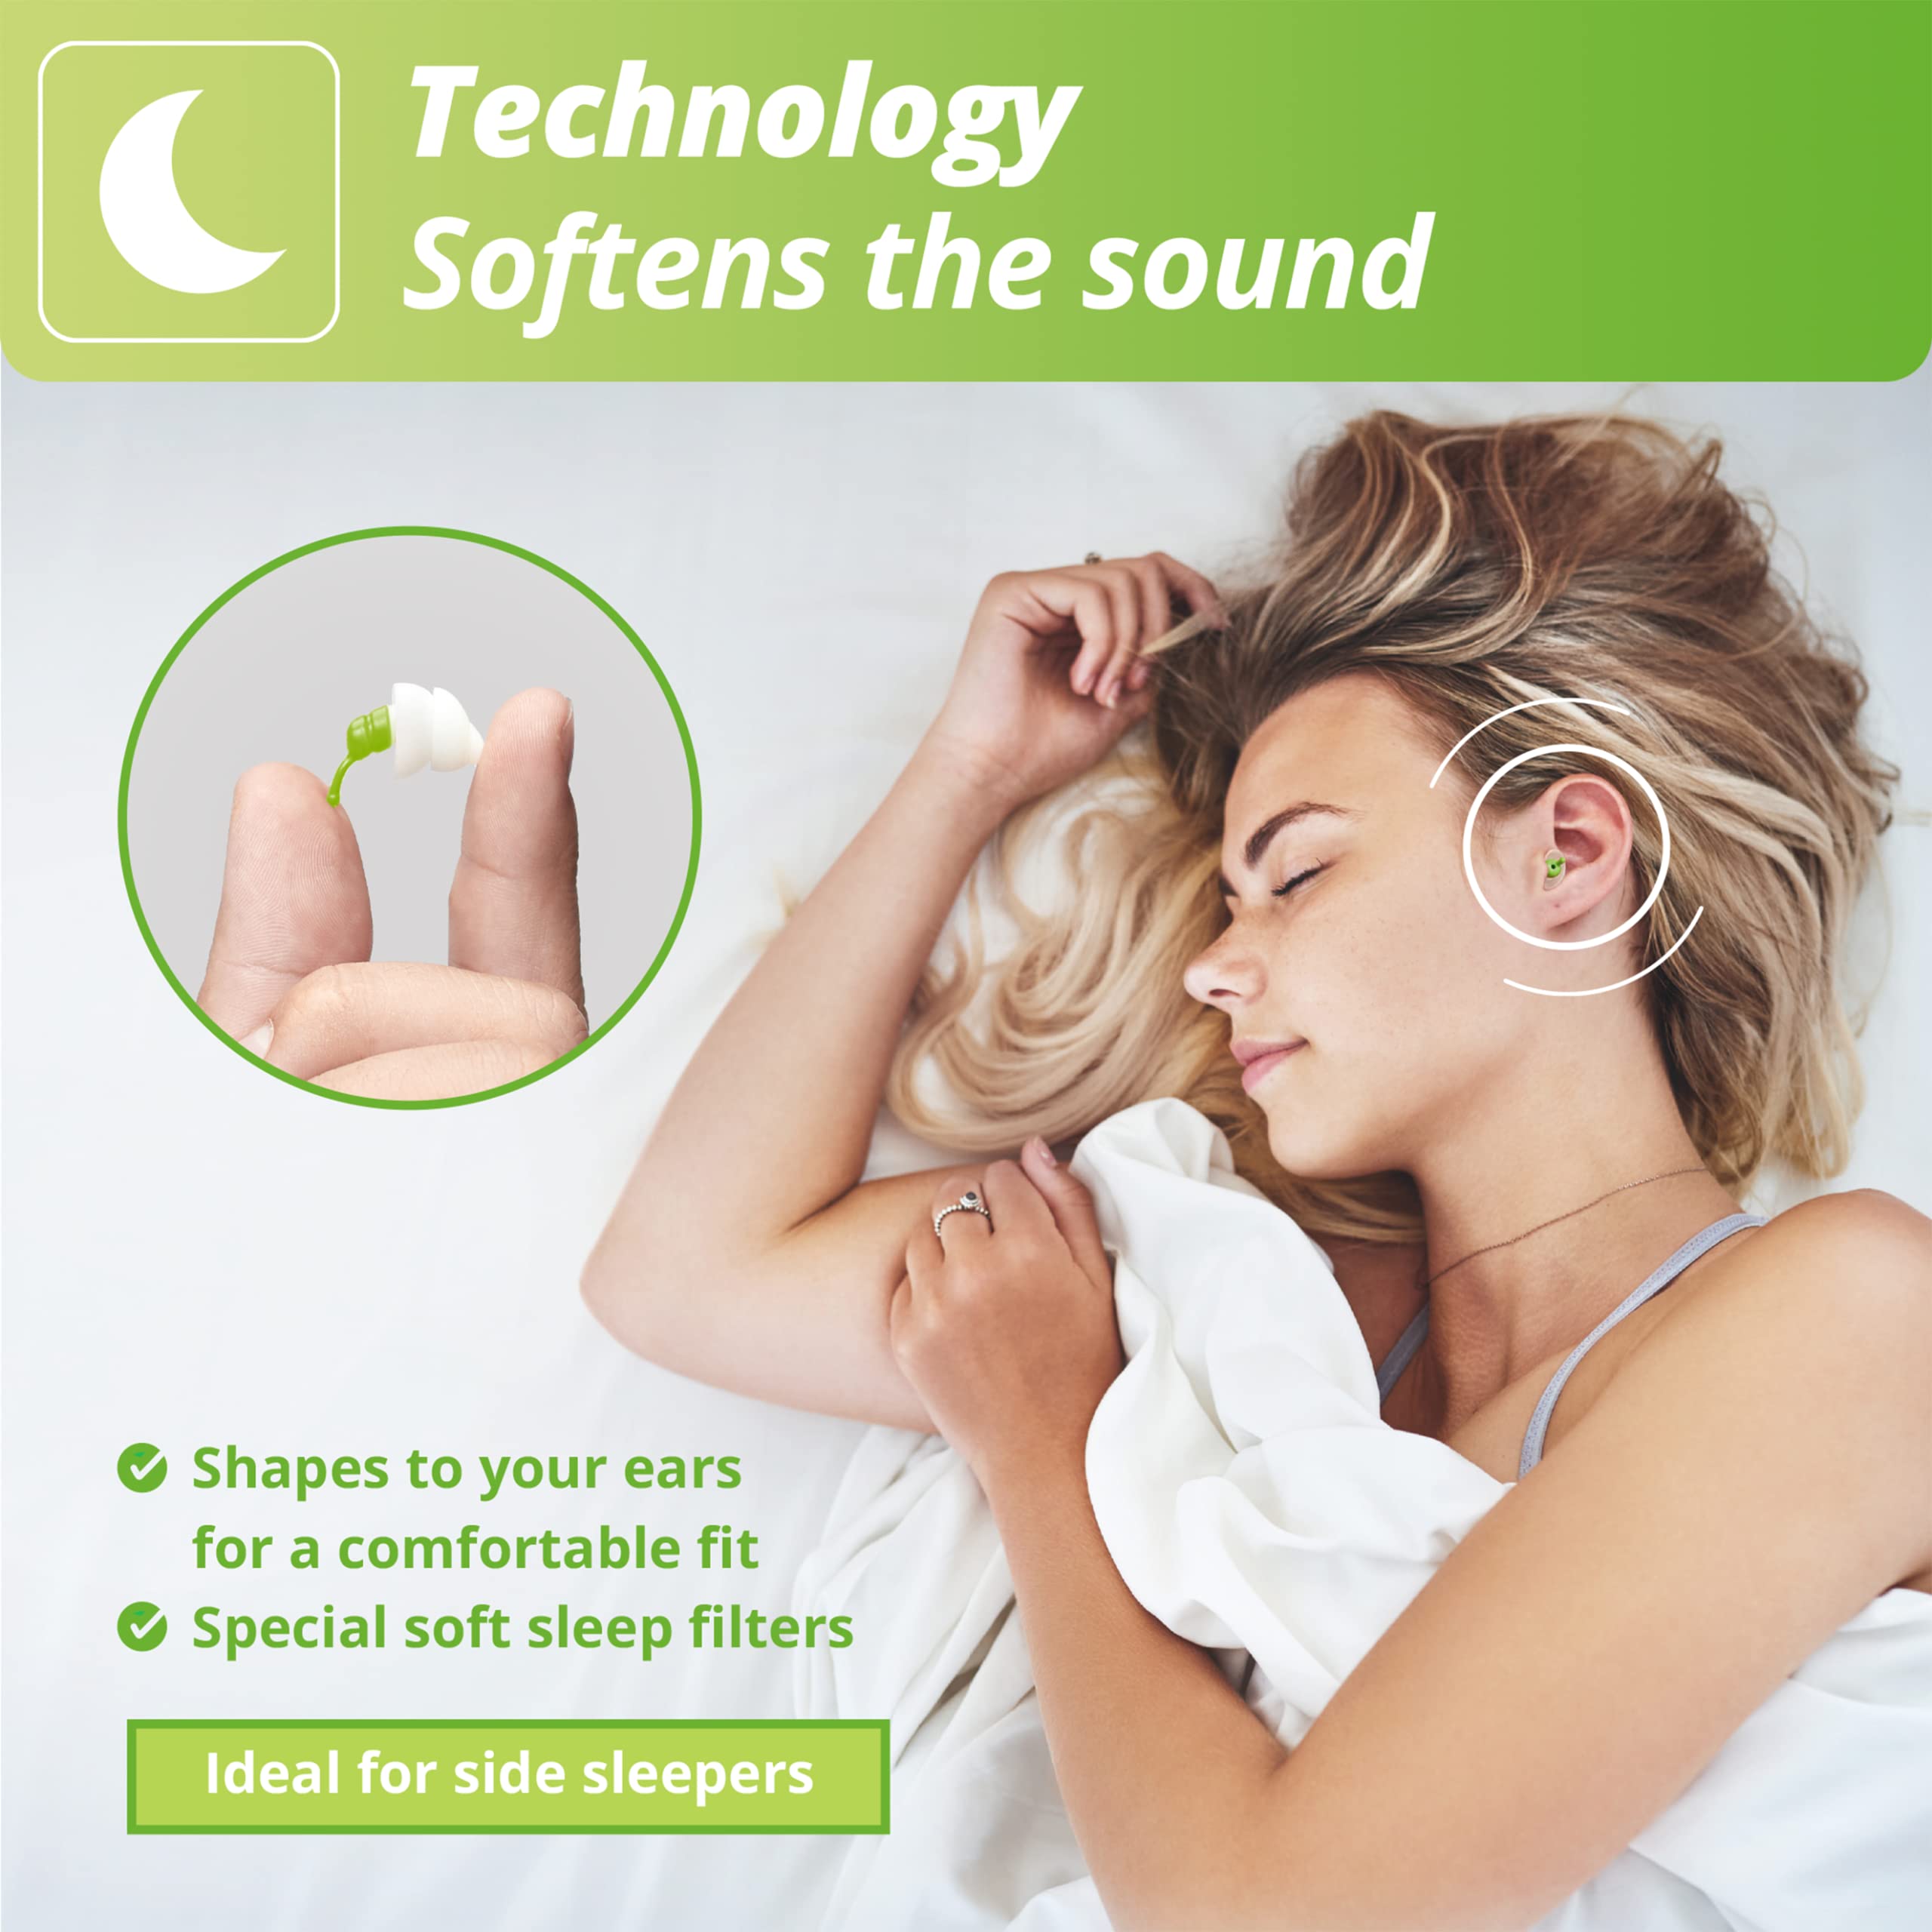 Alpine SleepSoft Sleeping Earplugs - Ultra Soft Filter for Side Sleeper - Reduce Noises & Improve Sleep - Reusable, Hygienic, Hypoallergenic Hearing Protection for Adults with Long Lasting Comfort